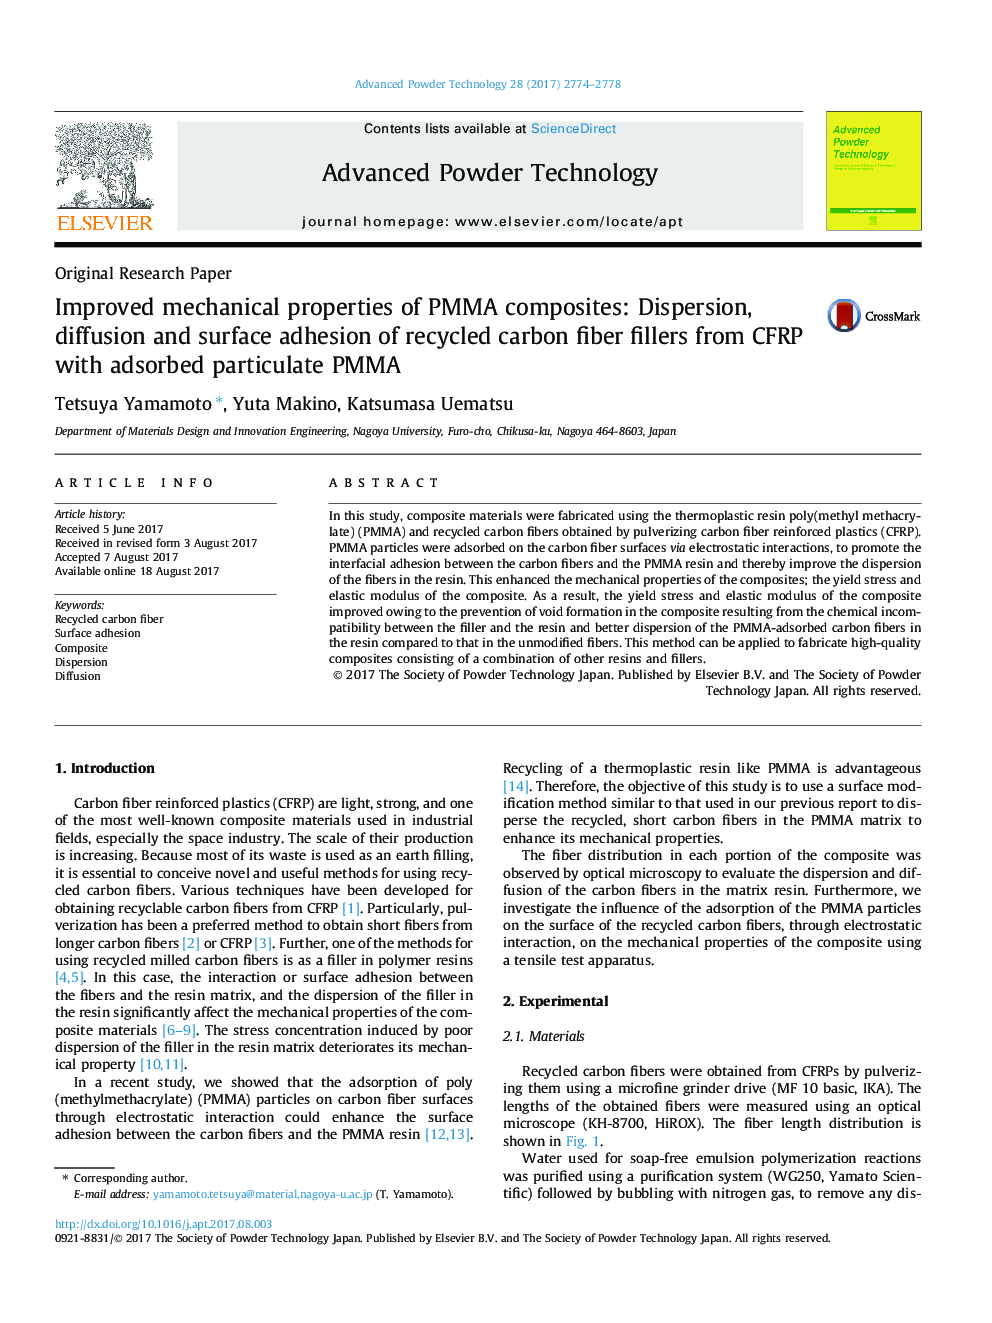 Improved mechanical properties of PMMA composites: Dispersion, diffusion and surface adhesion of recycled carbon fiber fillers from CFRP with adsorbed particulate PMMA